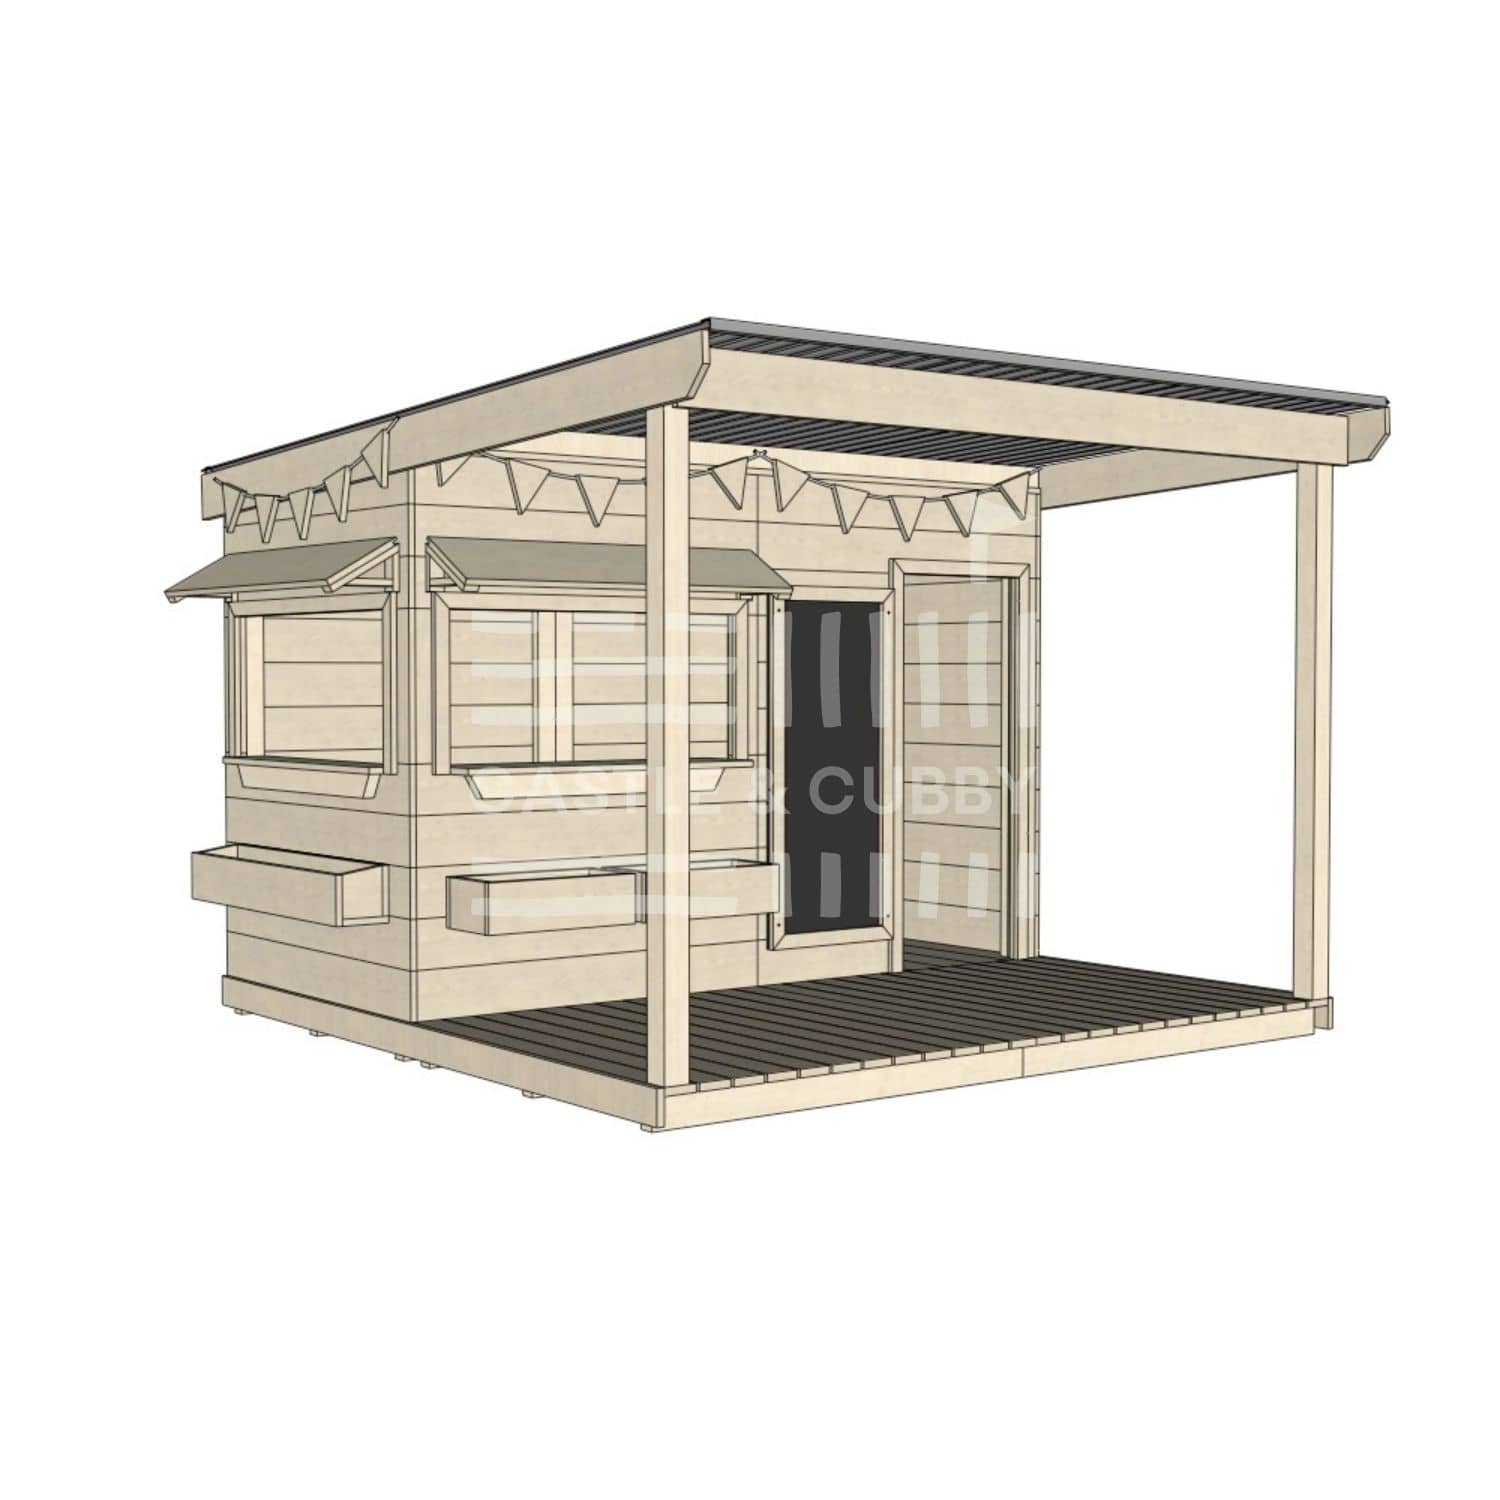 Layout options for midi rectangle cubby with front verandah